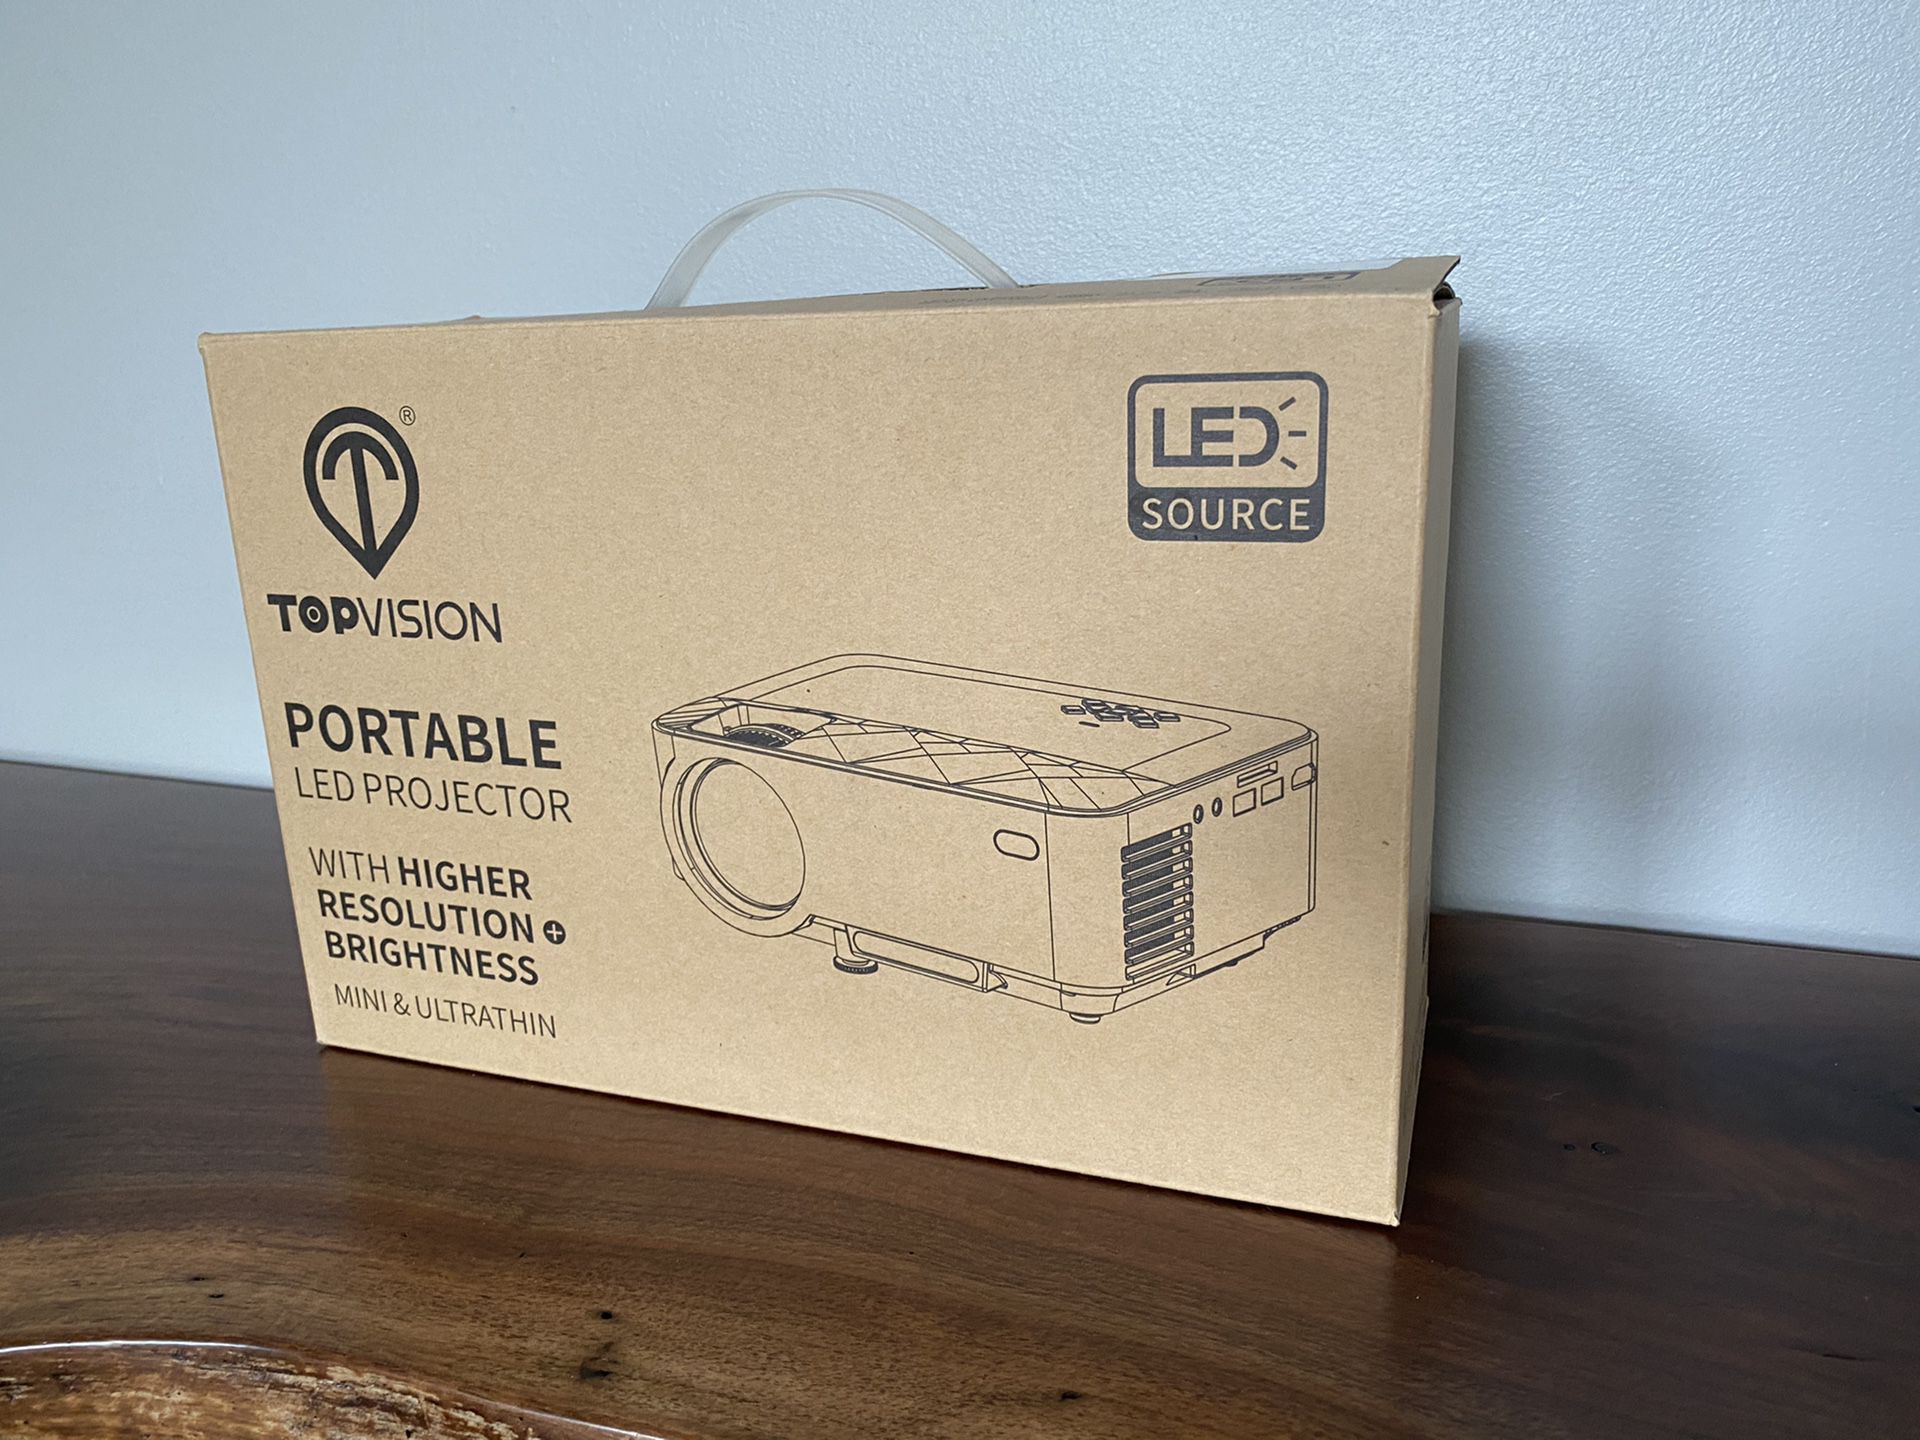 TOPVISION Portable LED projector